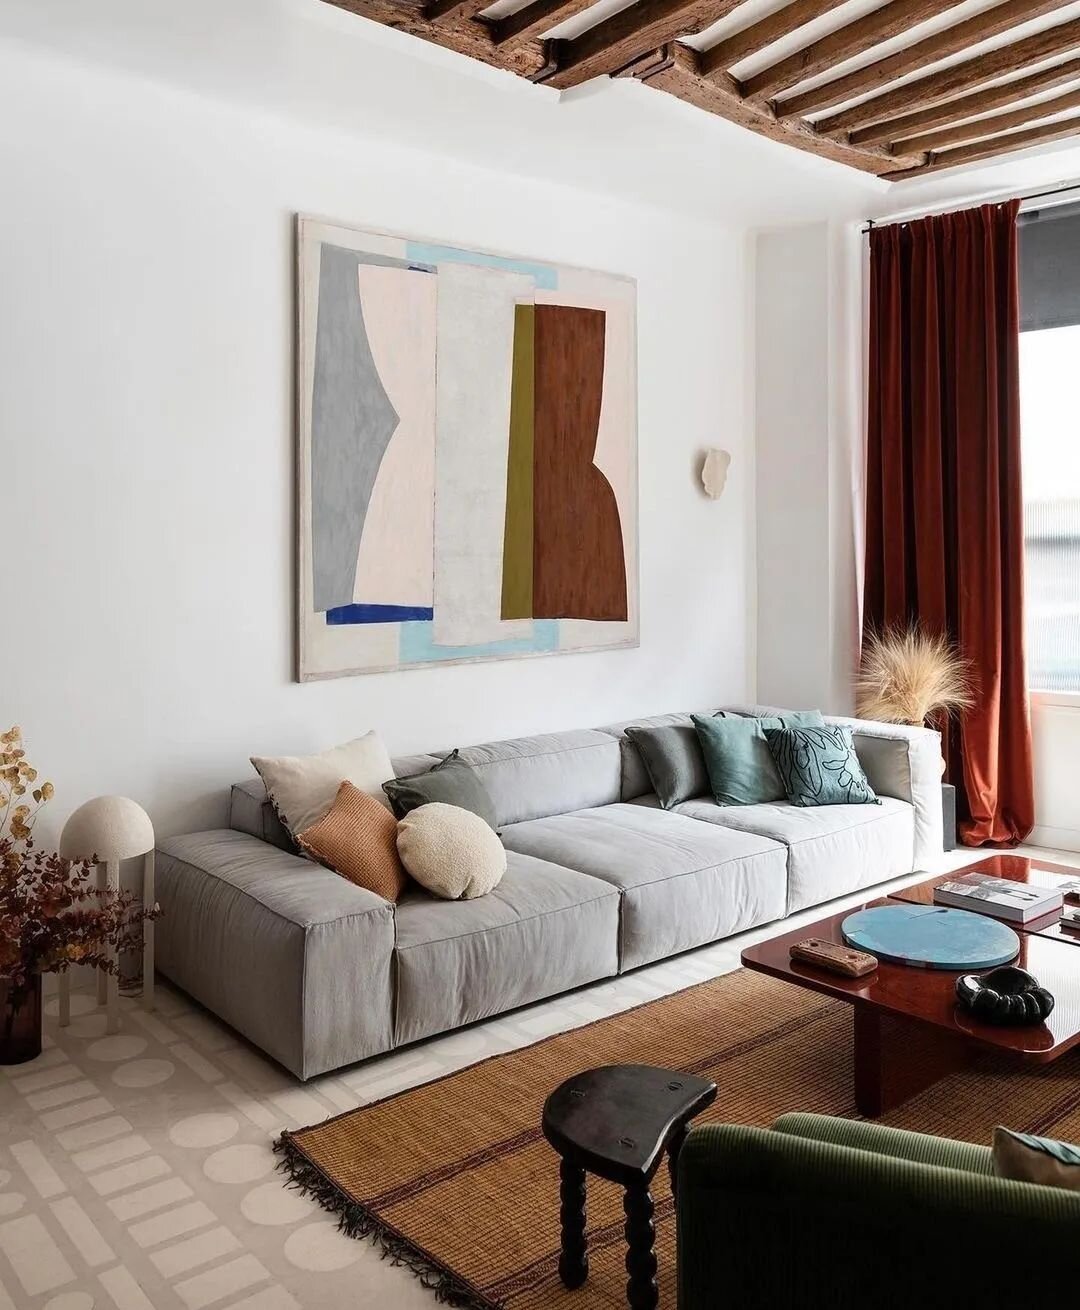 Parisian design style from @batiikstudio, bringing artists @__roule__ and @clement.mancini into this textural , layered space.

Interior designers and artists are the perfect pairing 🥂. DM us if you are an artist who is interested in connecting with